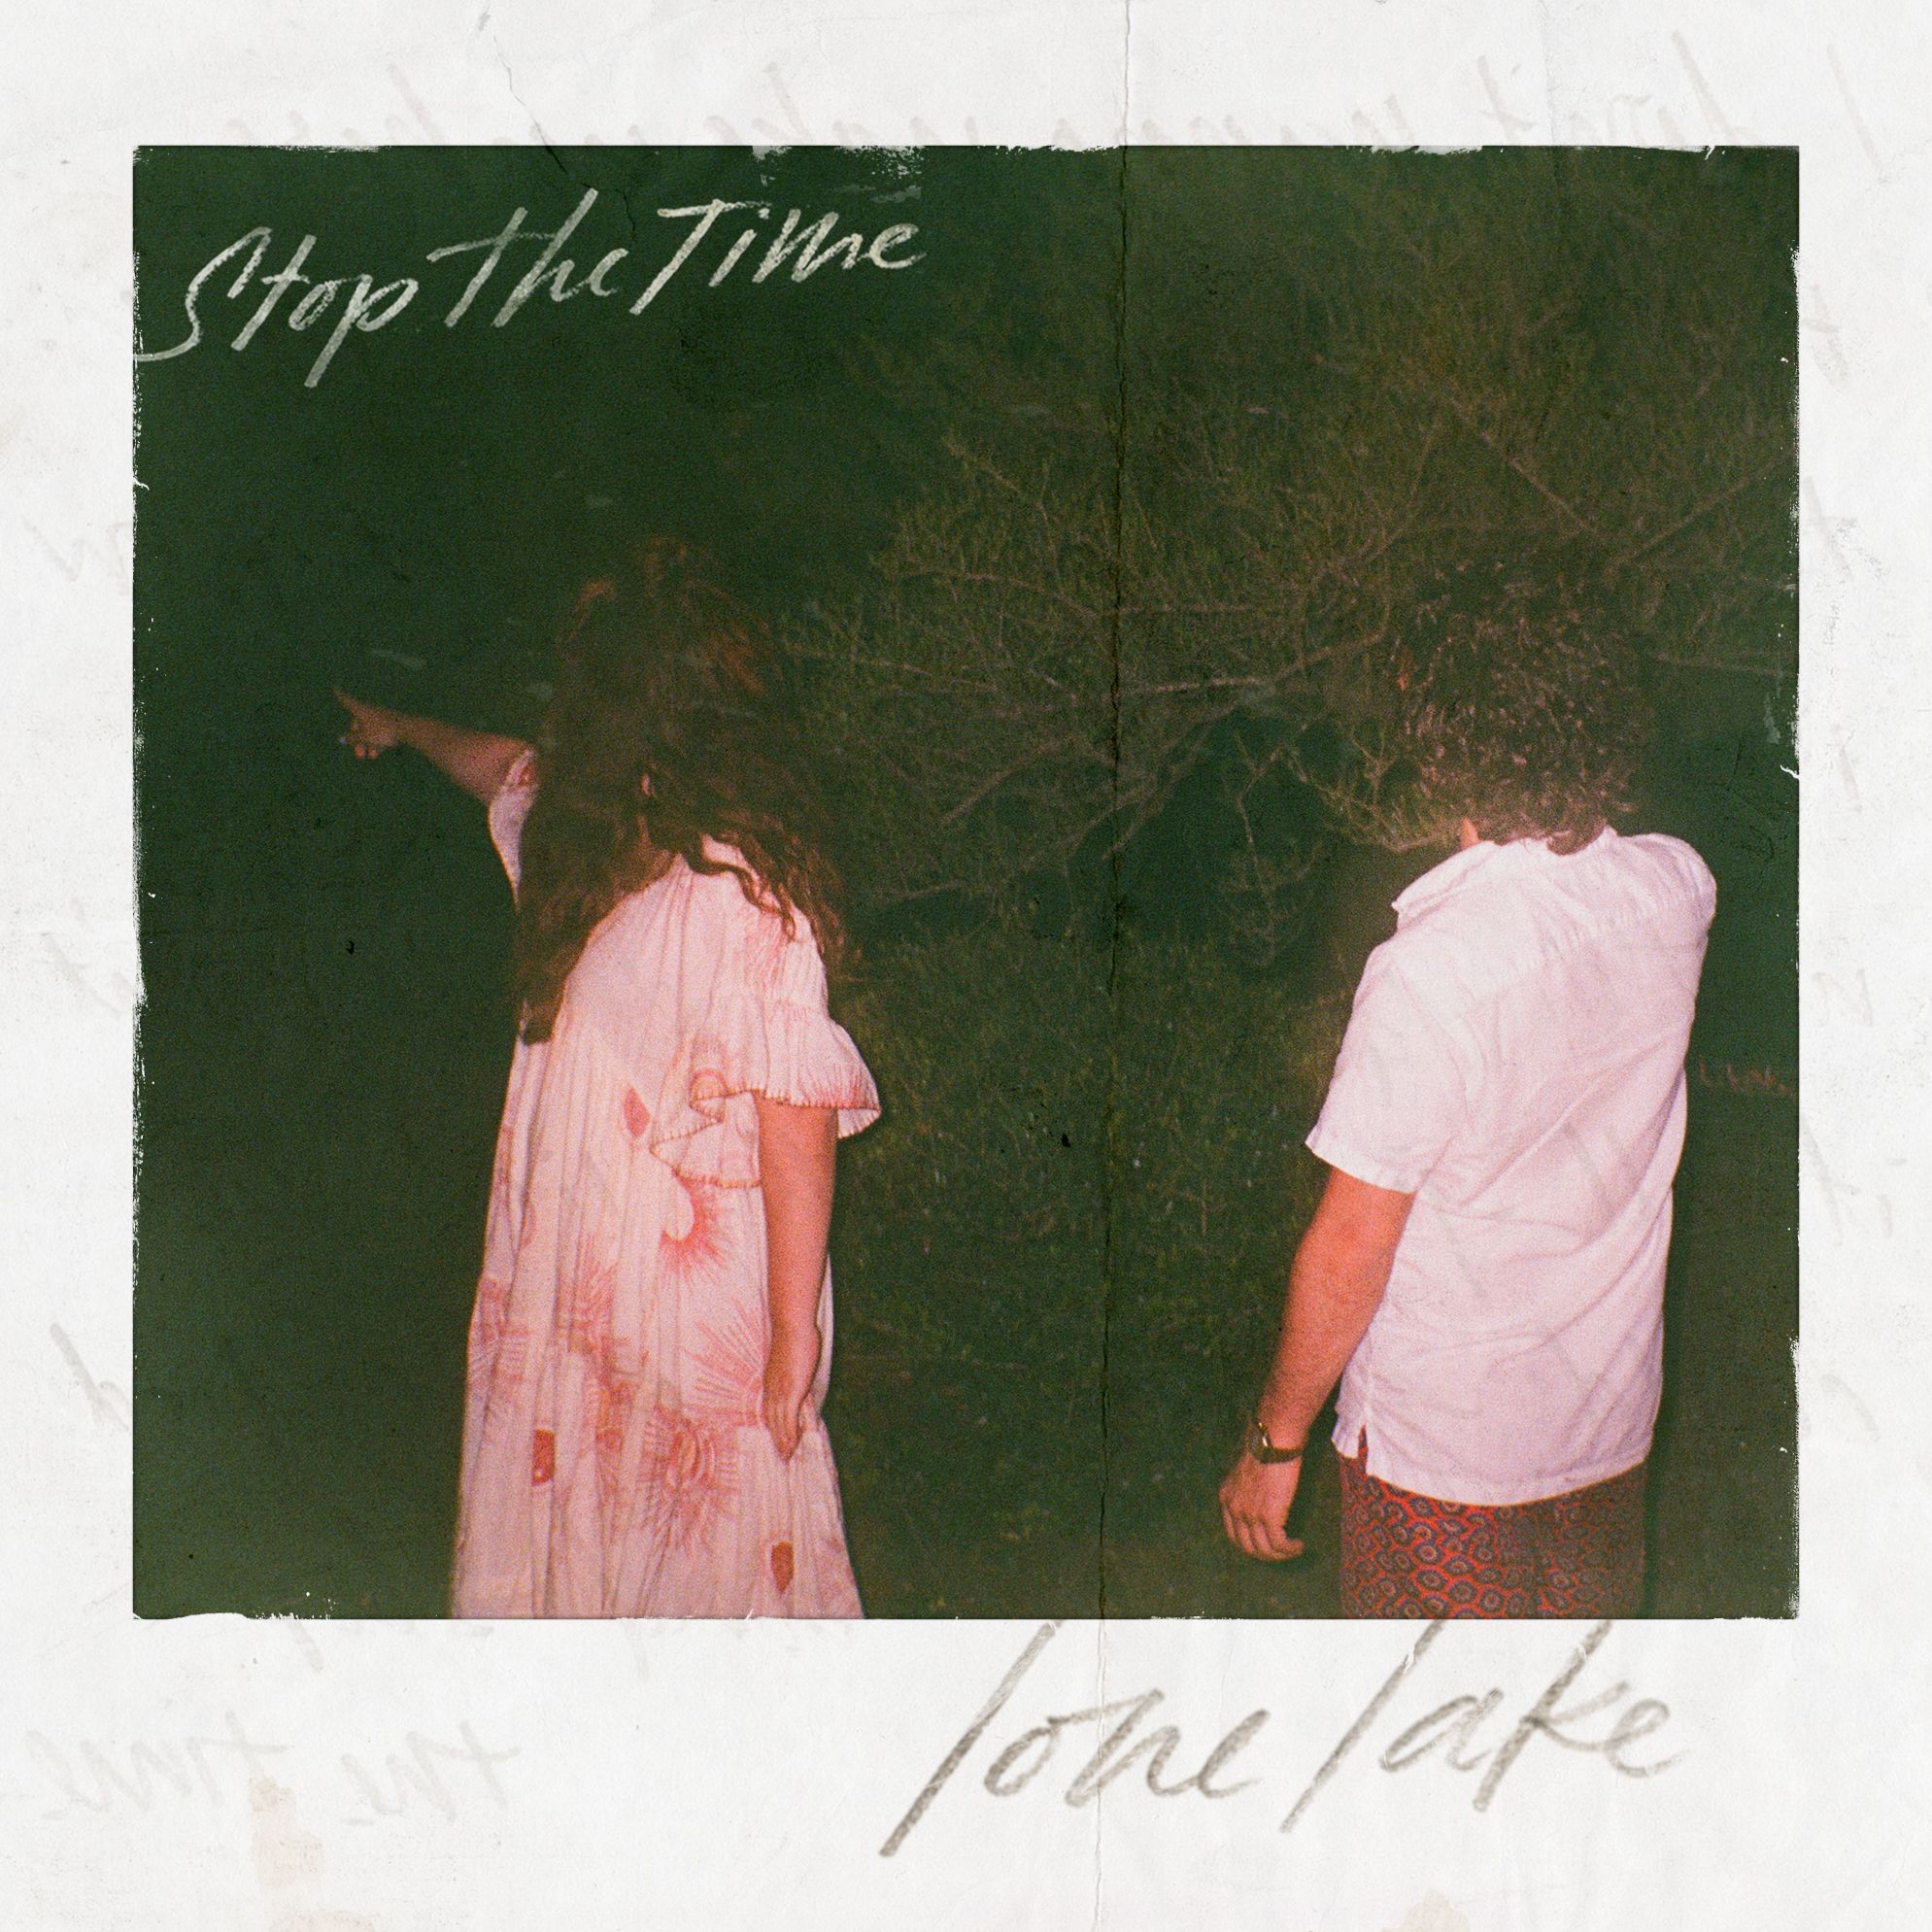 stop the time - lone lake - usa - indie - indie music - indie pop - indie rock - indie folk - new music - music blog - wolf in a suit - wolfinasuit - wolf in a suit blog - wolf in a suit music blog